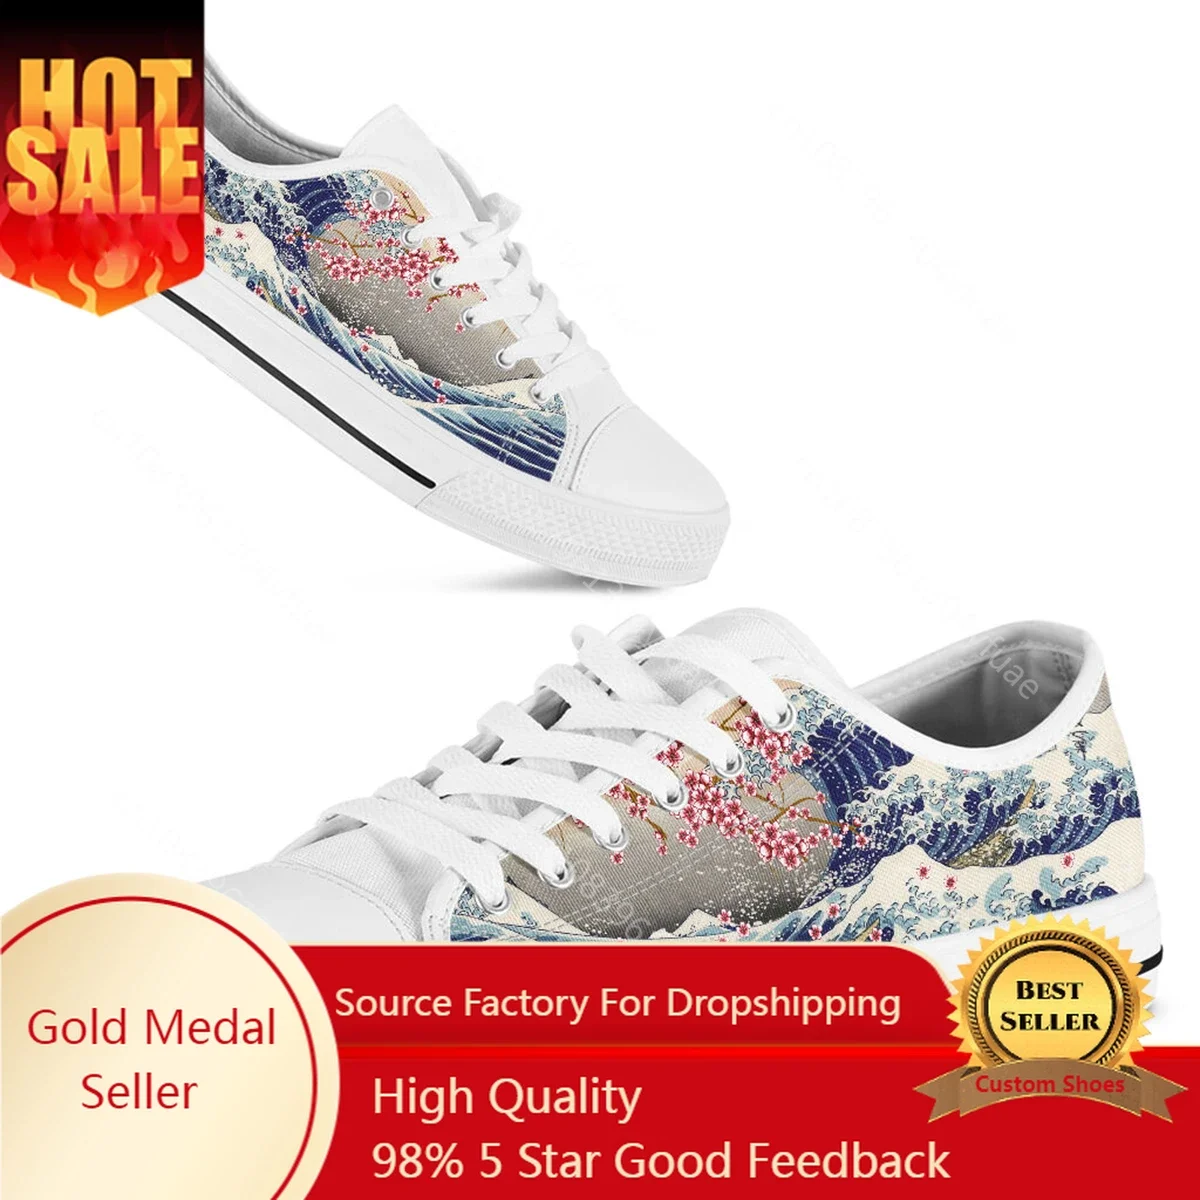 

The Great Wave Saruka Flower Women Casual Flat Shoes Lace-up Loe top Canvas Sneakers Big Size 45/46